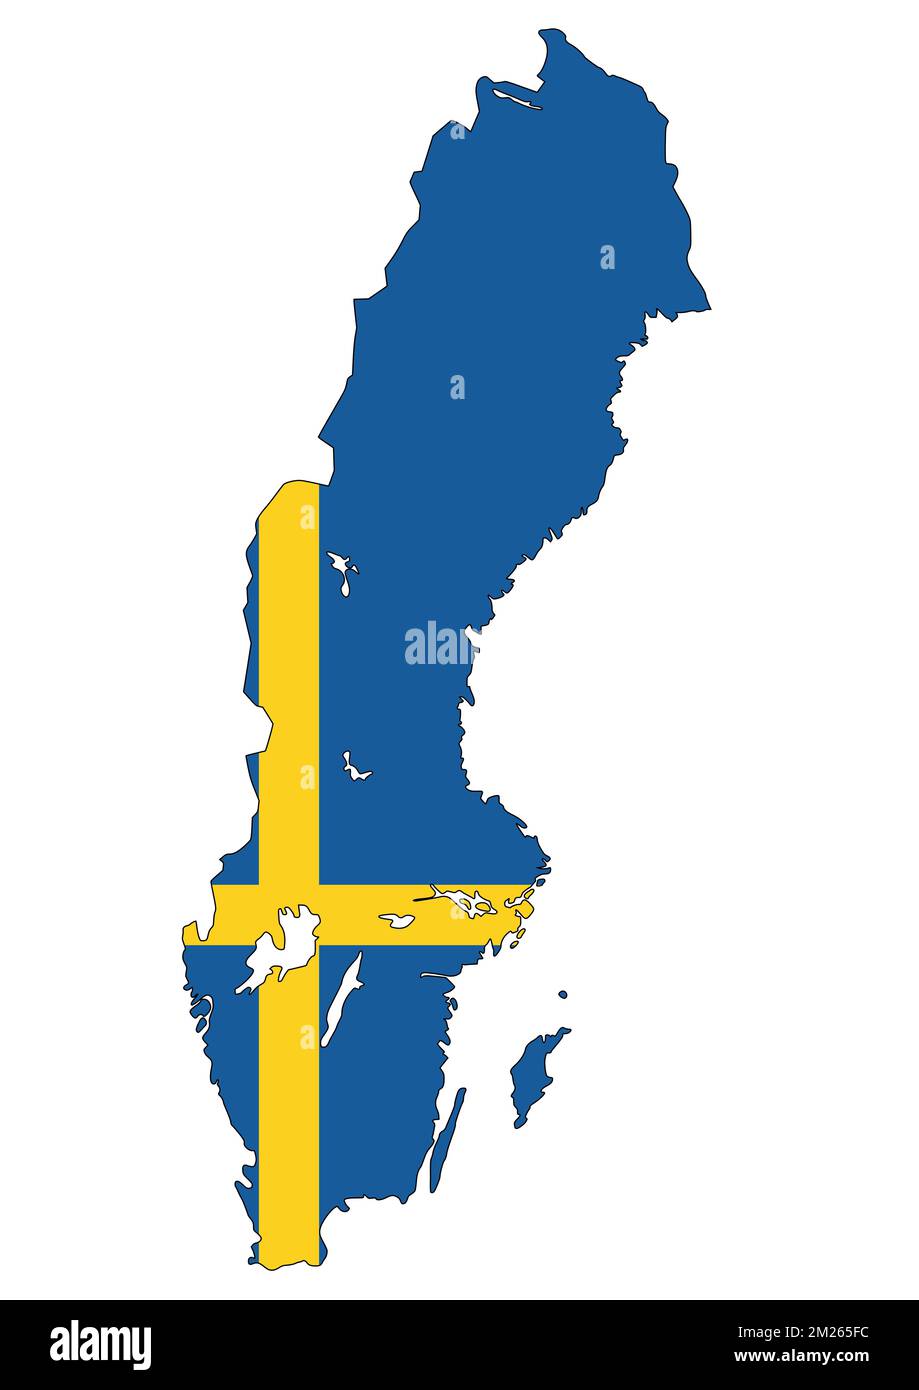 Map Of Sweden Filled With Official Flag Colors 2M265FC 